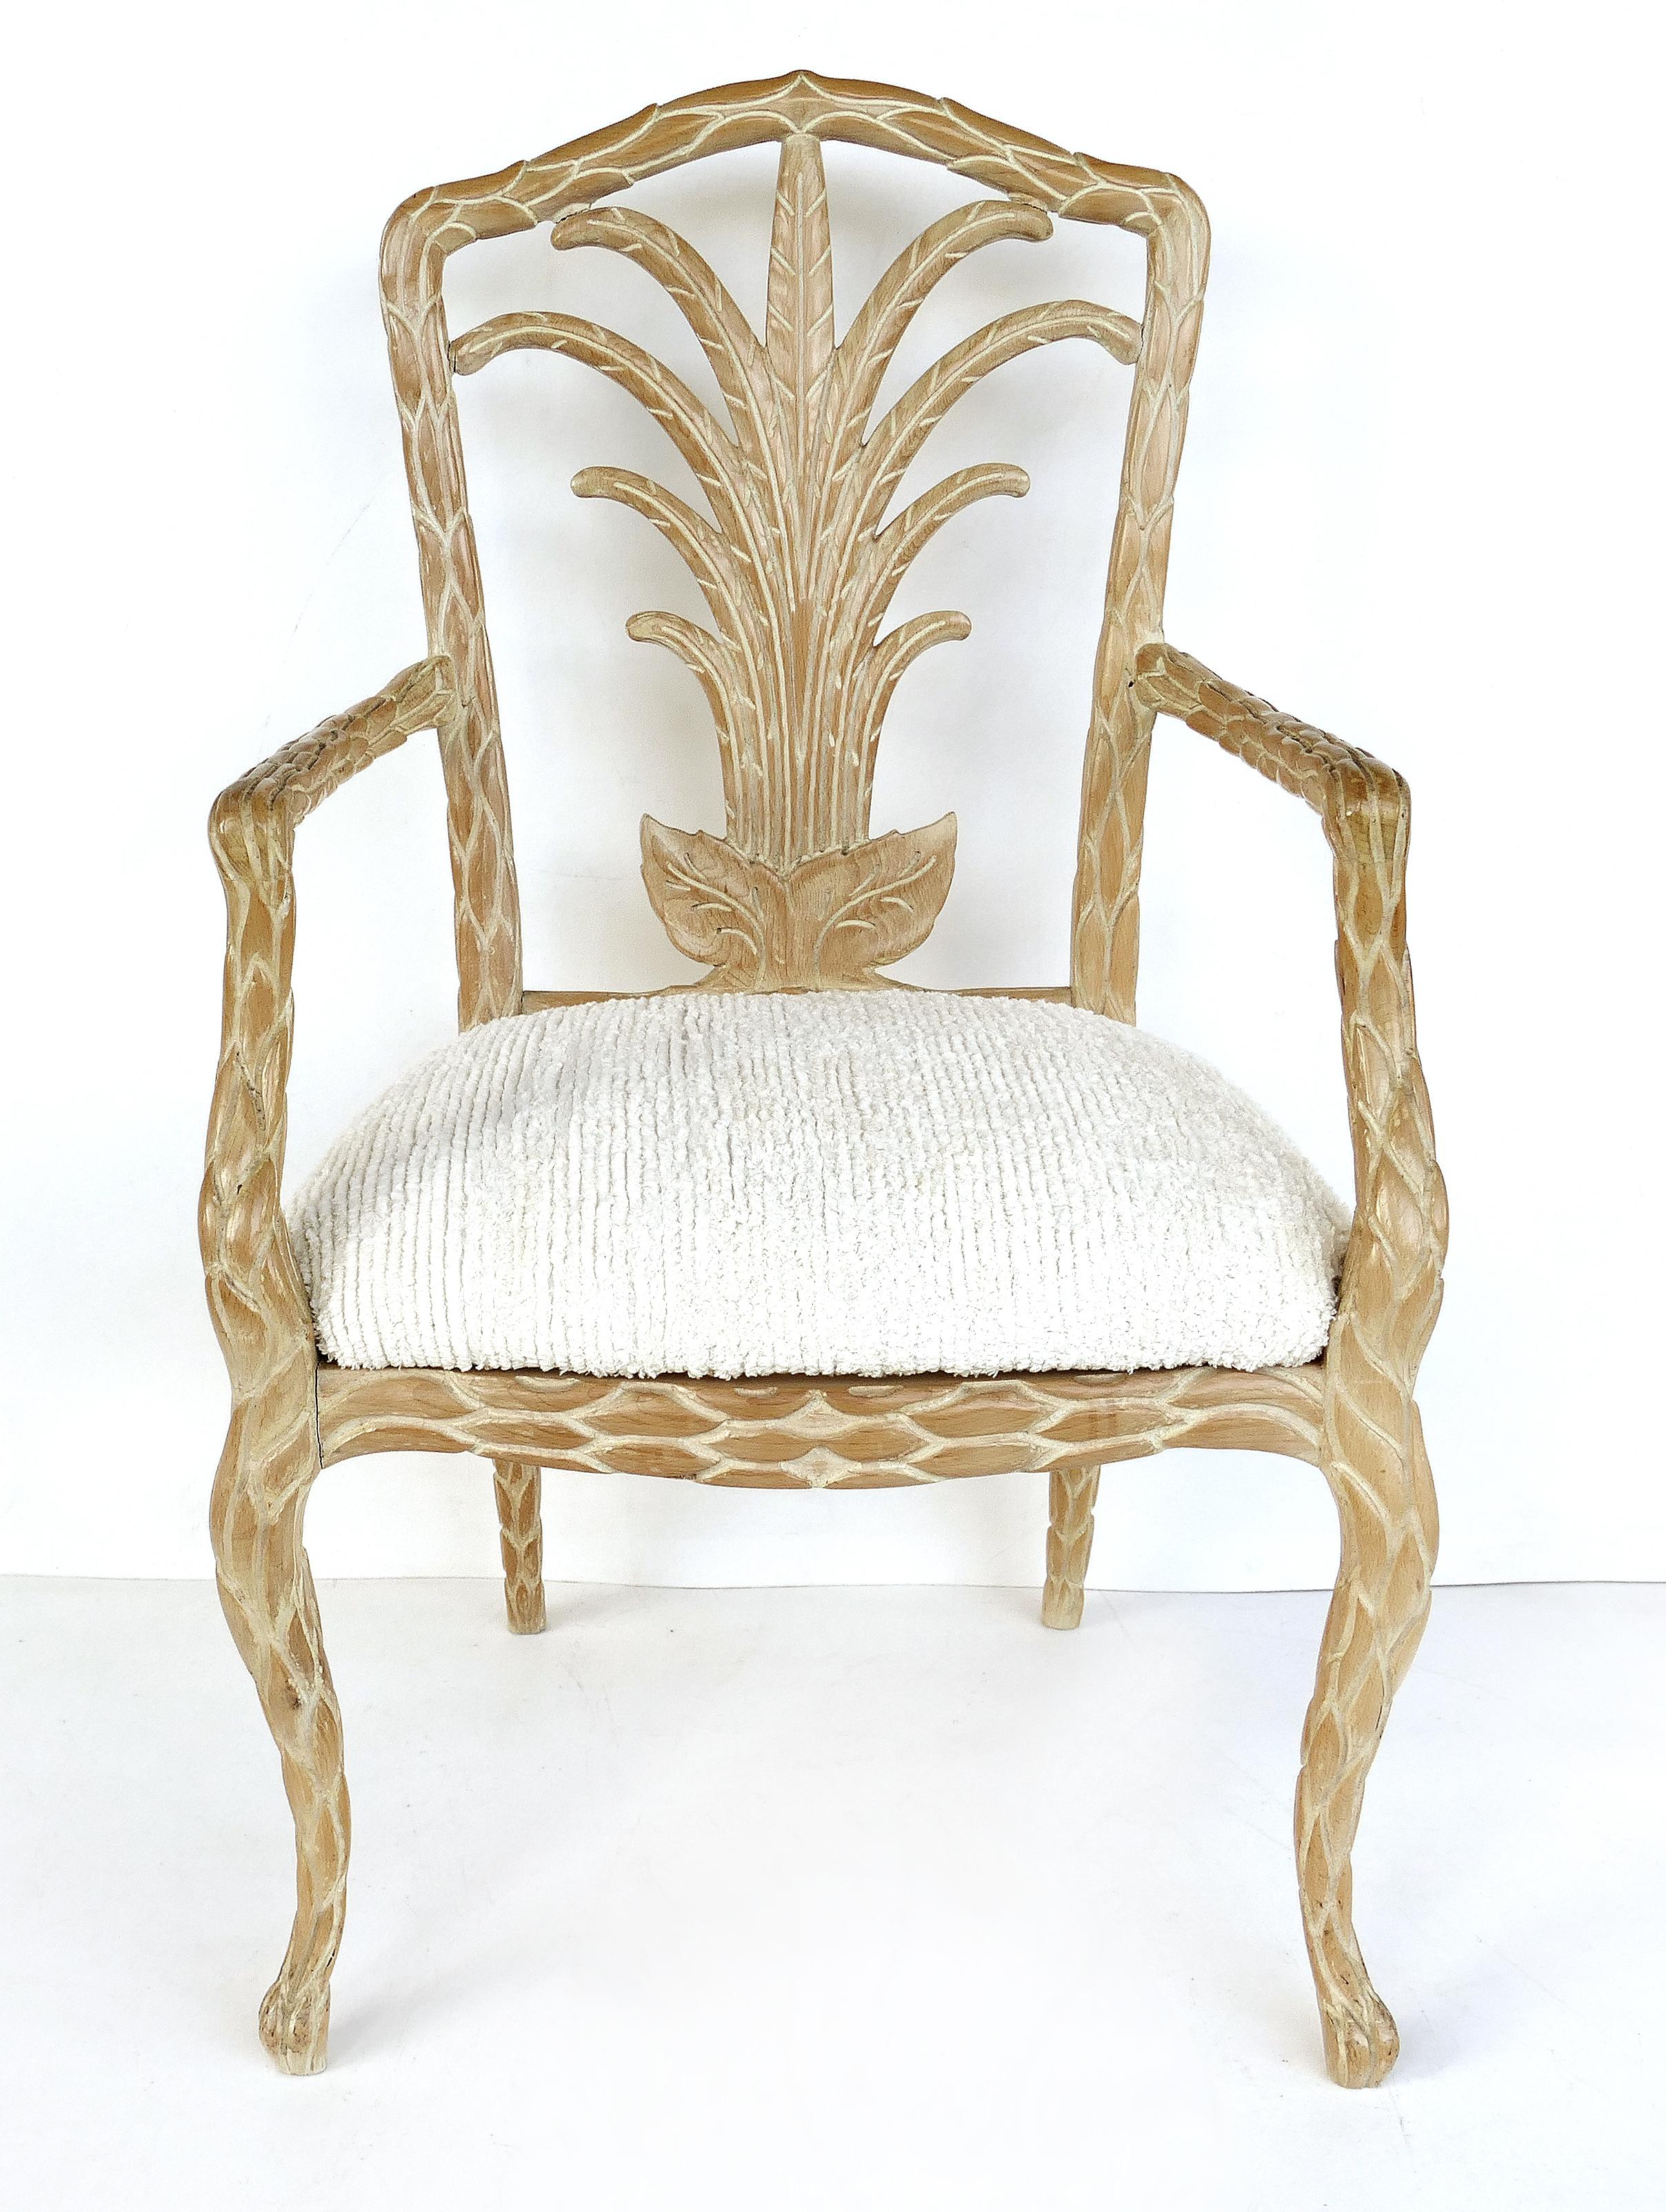 Palm Beach Regency faux bois Kreiss armchairs, a pair

Offered for sale is an elegant pair of Palm Beach Regency Faux bois carved wood armchairs with palm frond details by Kreiss. These stately chairs are beautifully carved and the wood has a lovely